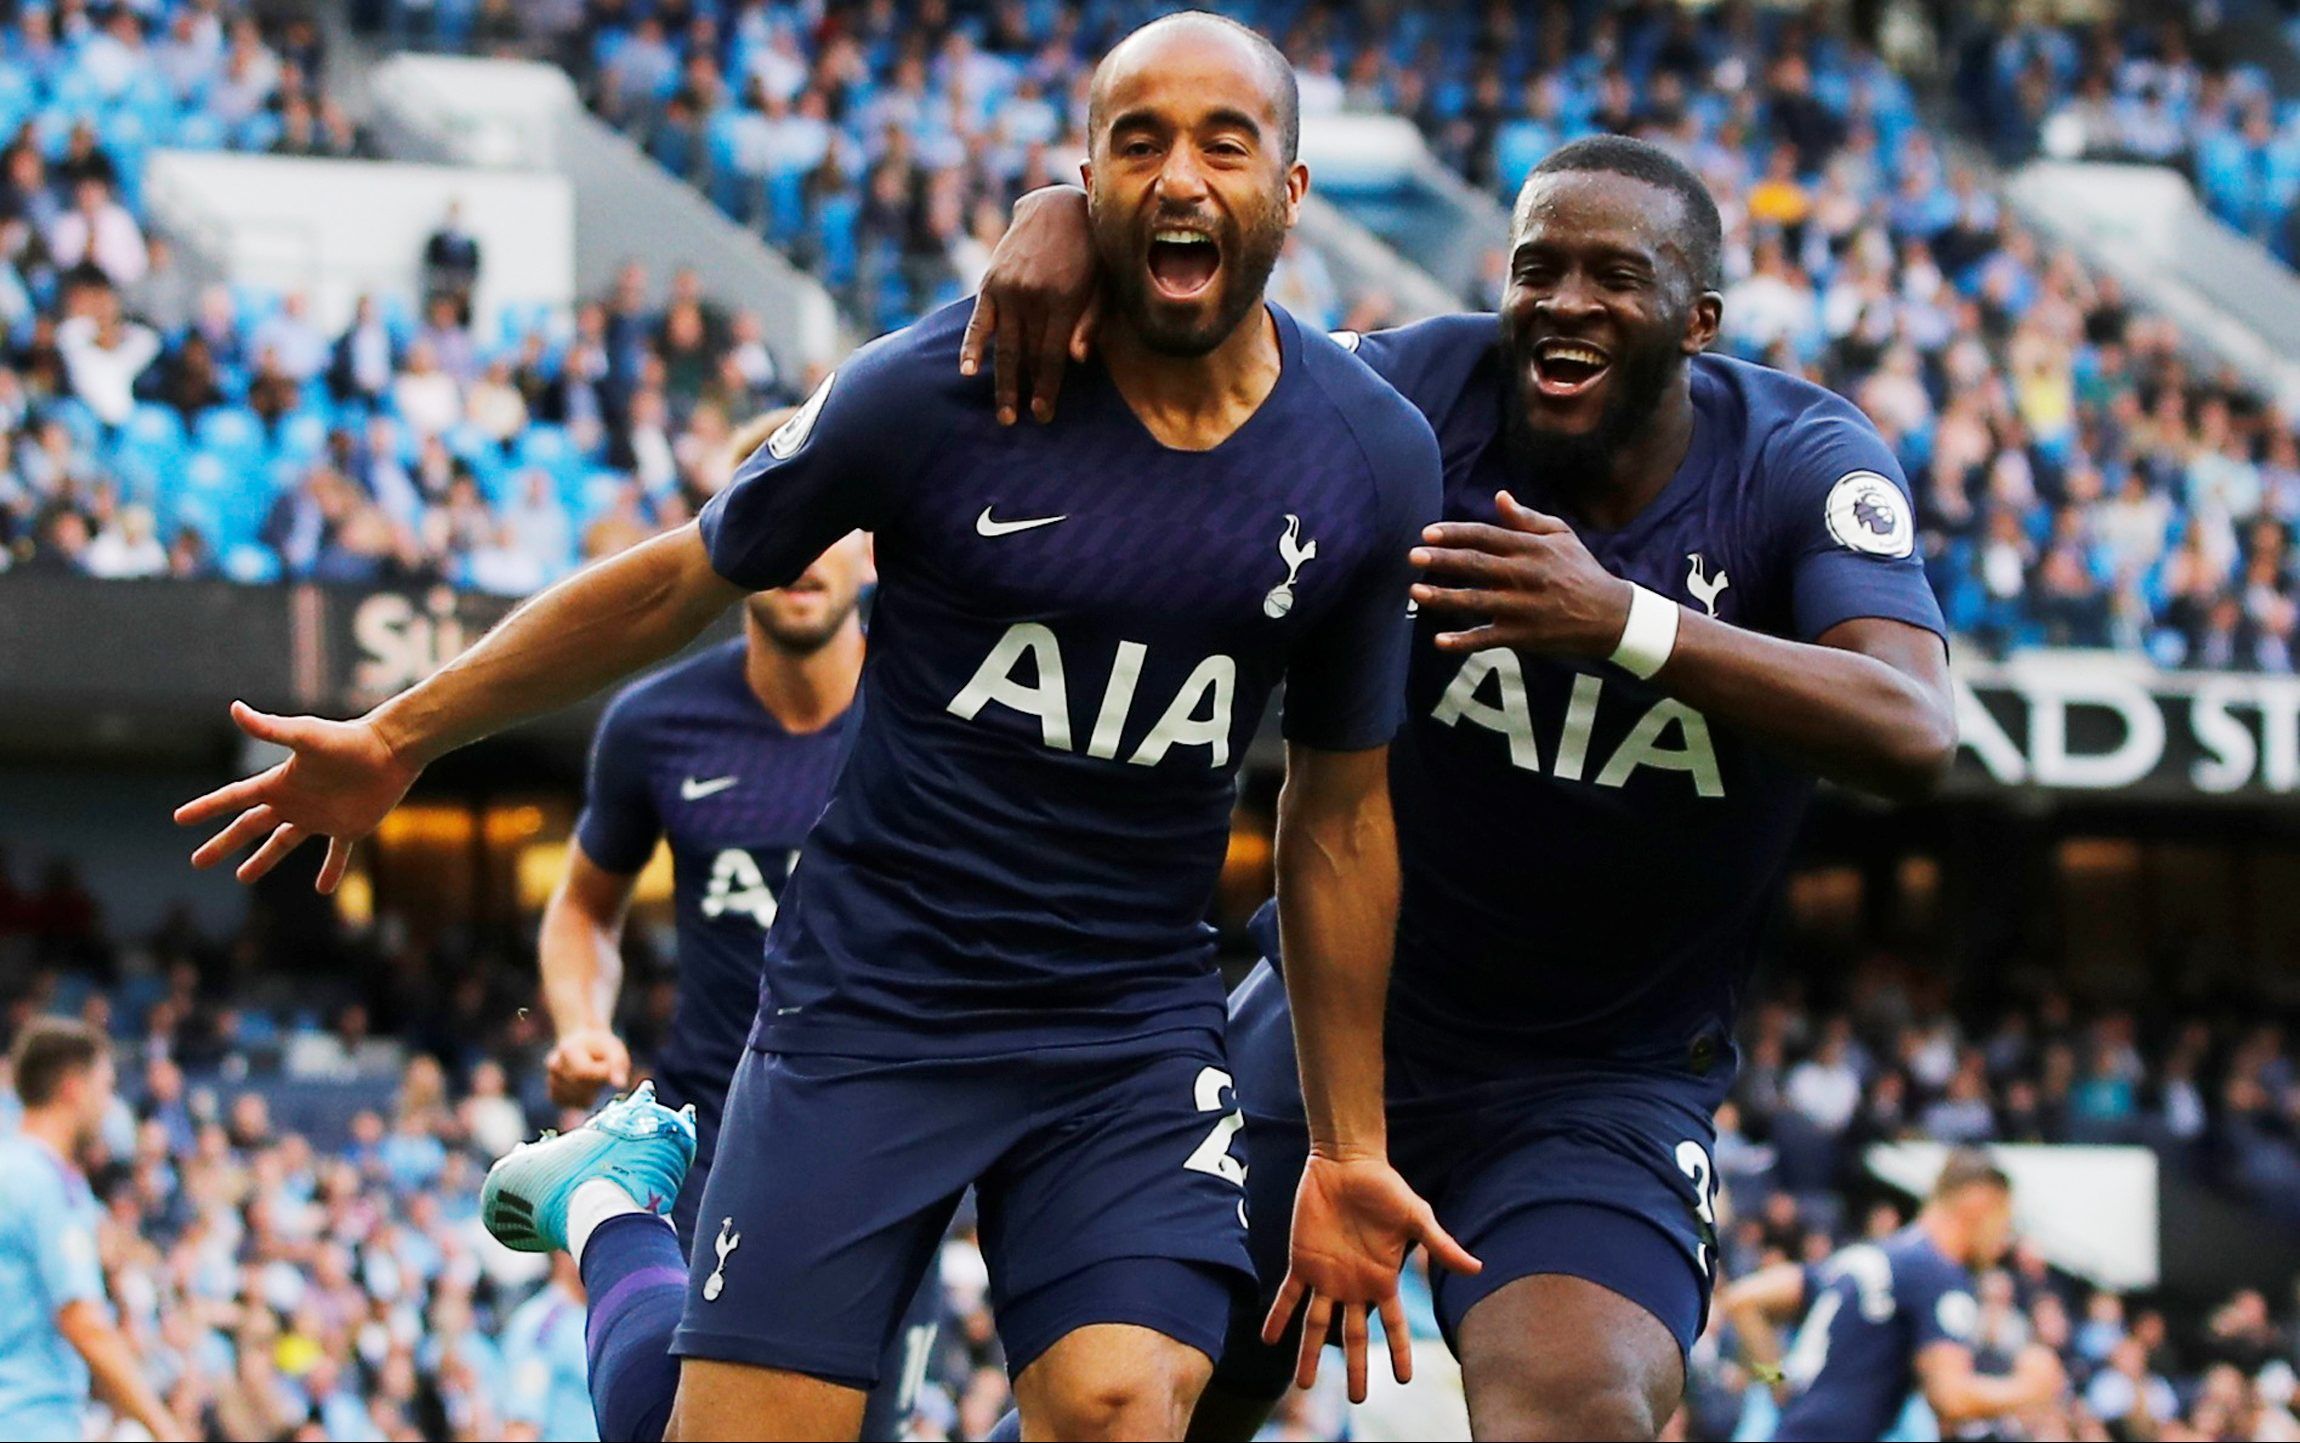 Soccer Football - Premier League - Manchester City v Tottenham Hotspur - Etihad Stadium, Manchester, Britain - August 17, 2019  Tottenham Hotspur's Lucas Moura celebrates scoring their second goal with Tanguy Ndombele   REUTERS/Phil Noble  EDITORIAL USE ONLY. No use with unauthorized audio, video, data, fixture lists, club/league logos or 